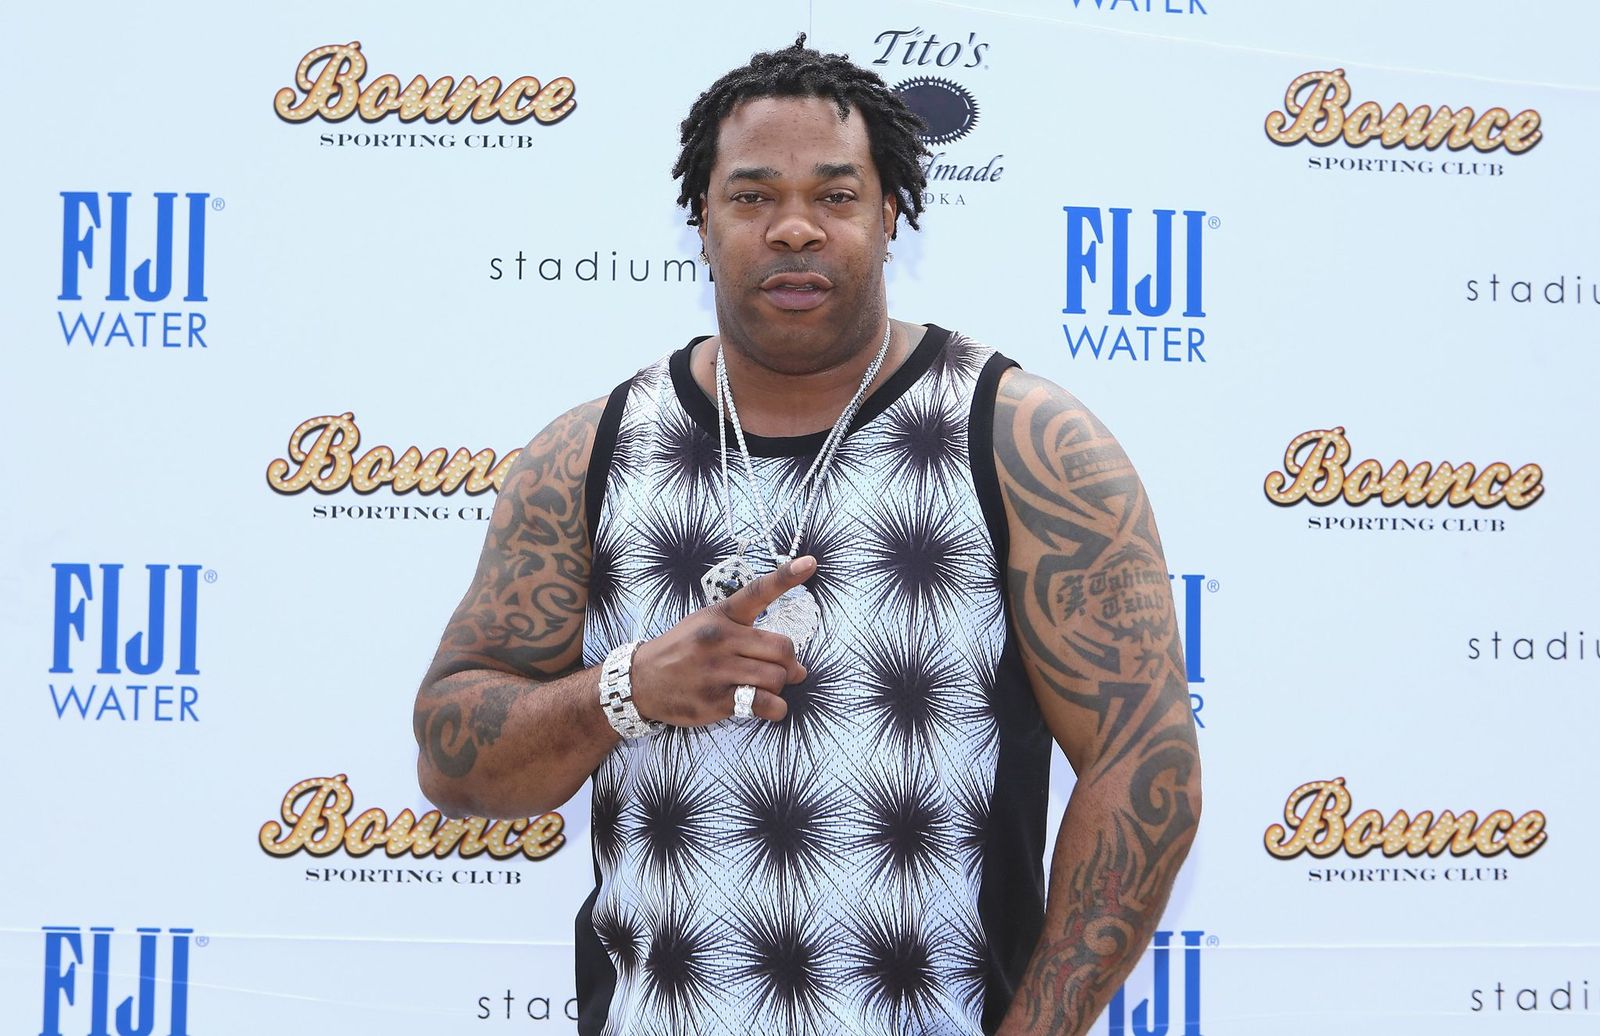 Busta Rhymes at the Bounce Sporting Club World Cup Viewing Party at Stadium Red on July 13, 2014 in Sag Harbor, New York. | Photo: Getty Images